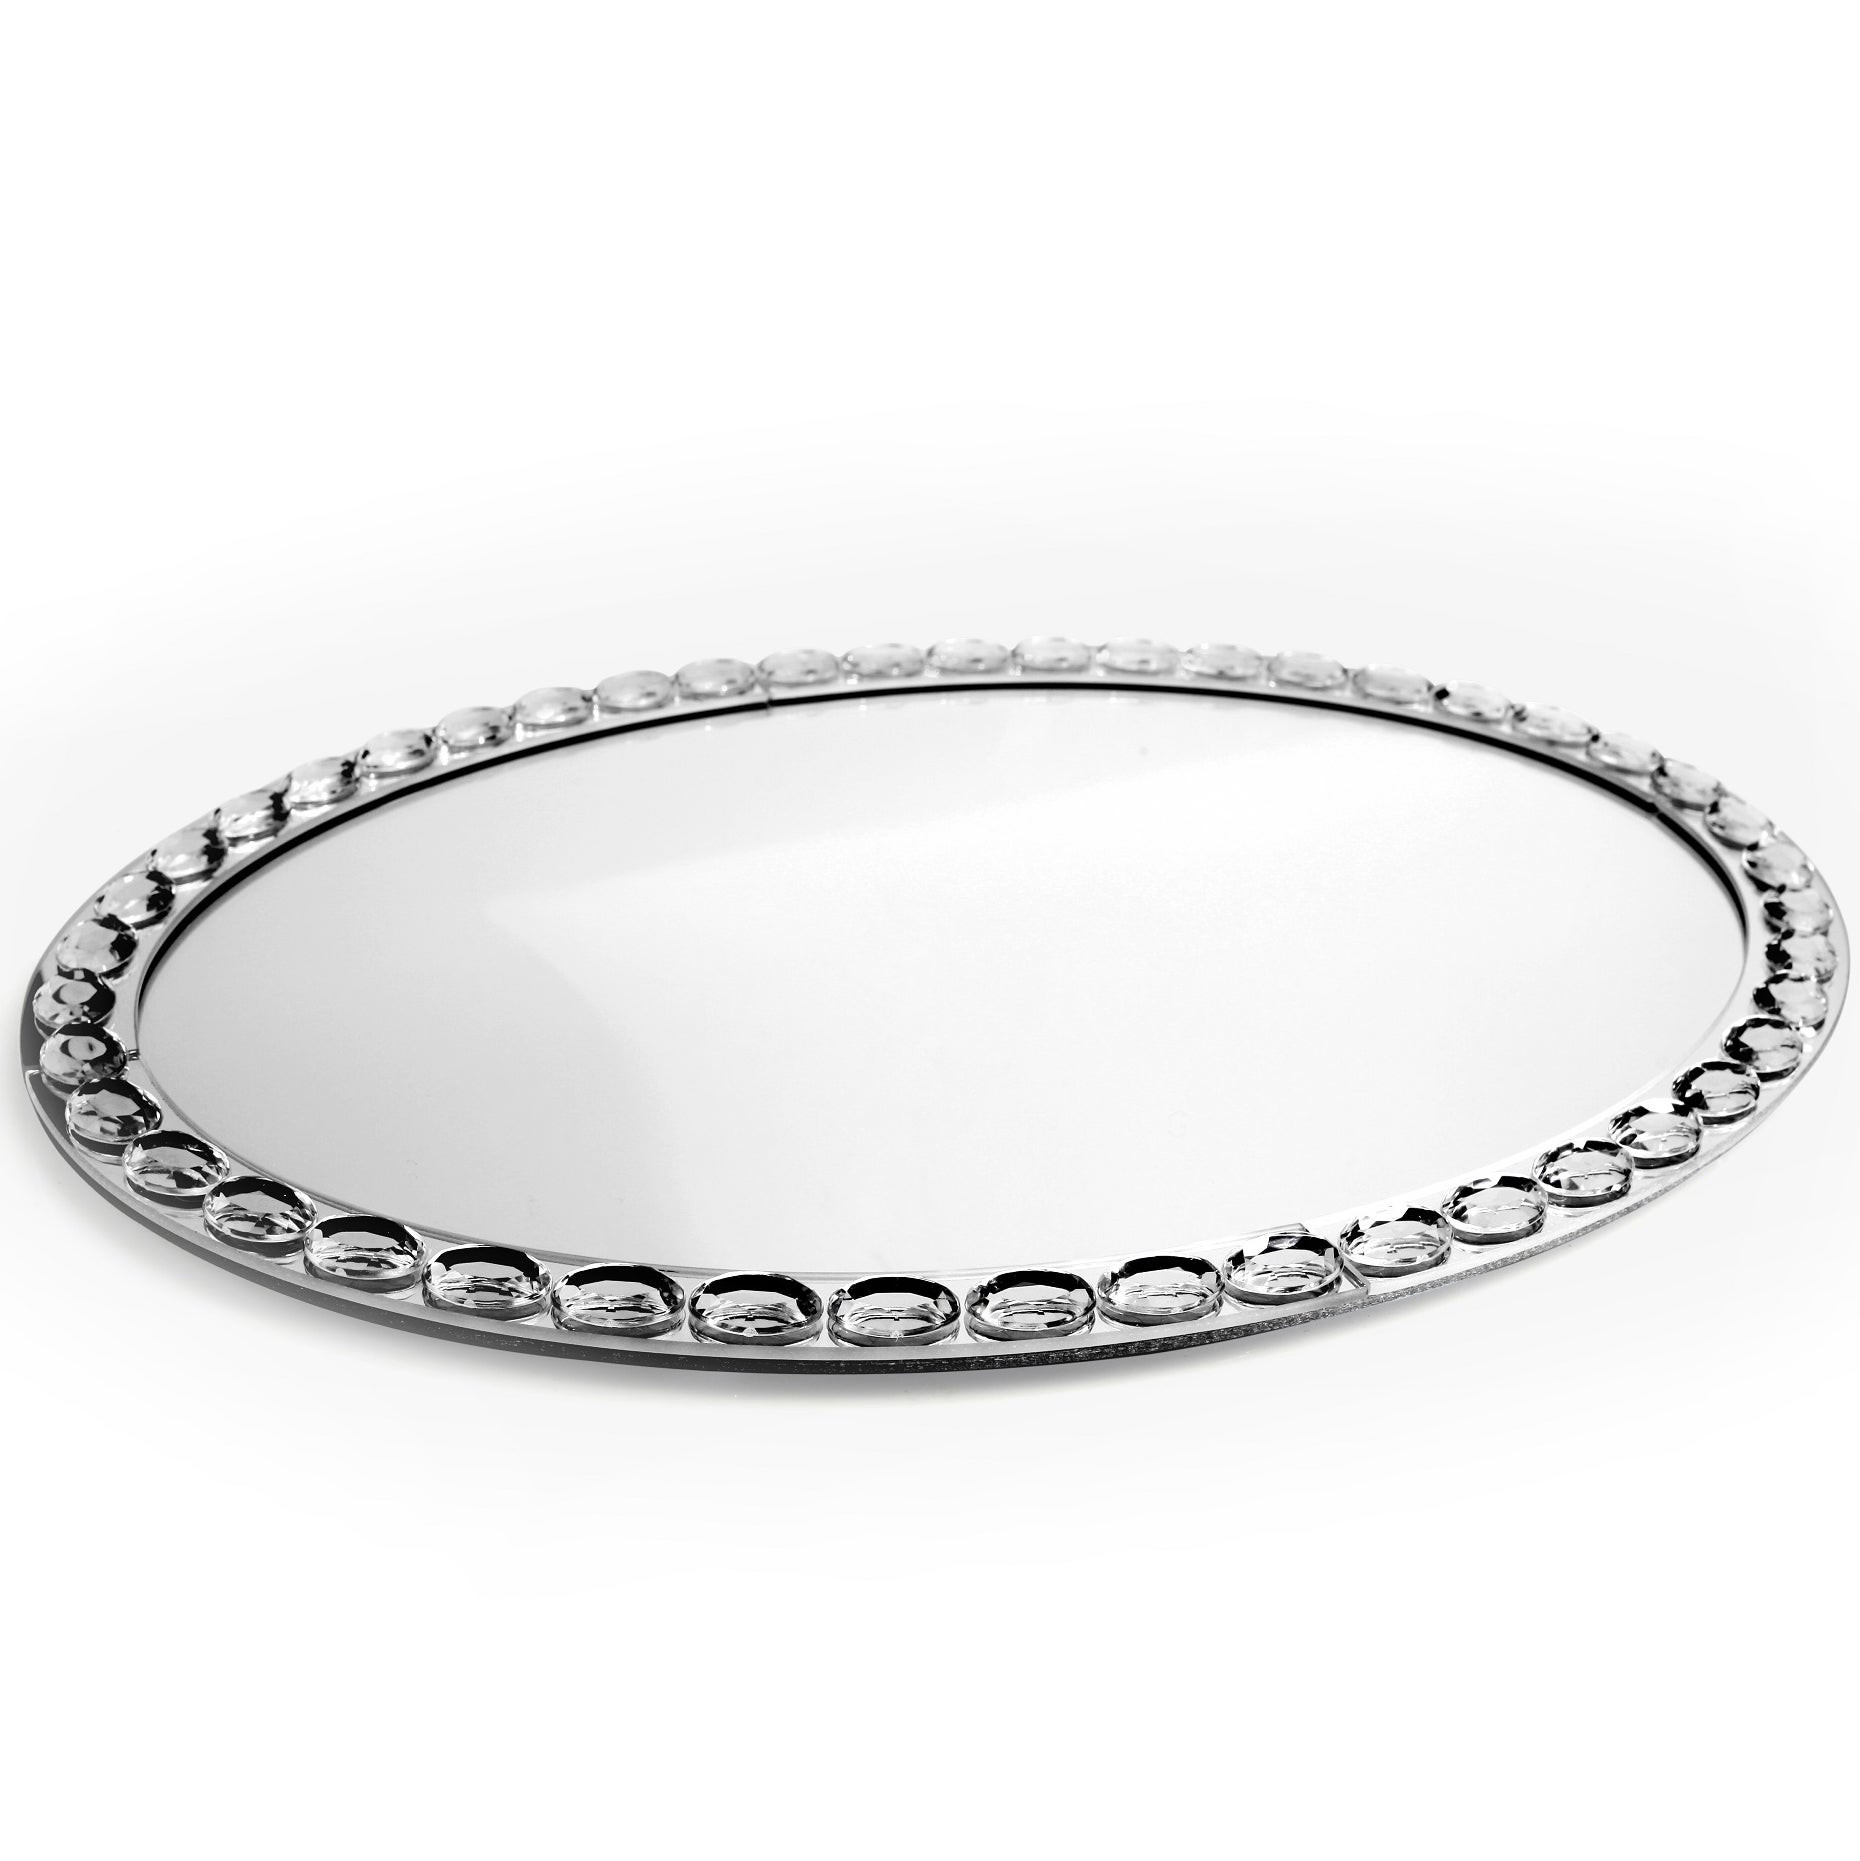 Mirrored Bathroom Tray
 Mirrored Glass Oval Vanity Tray 18 5 x 13 5 inches